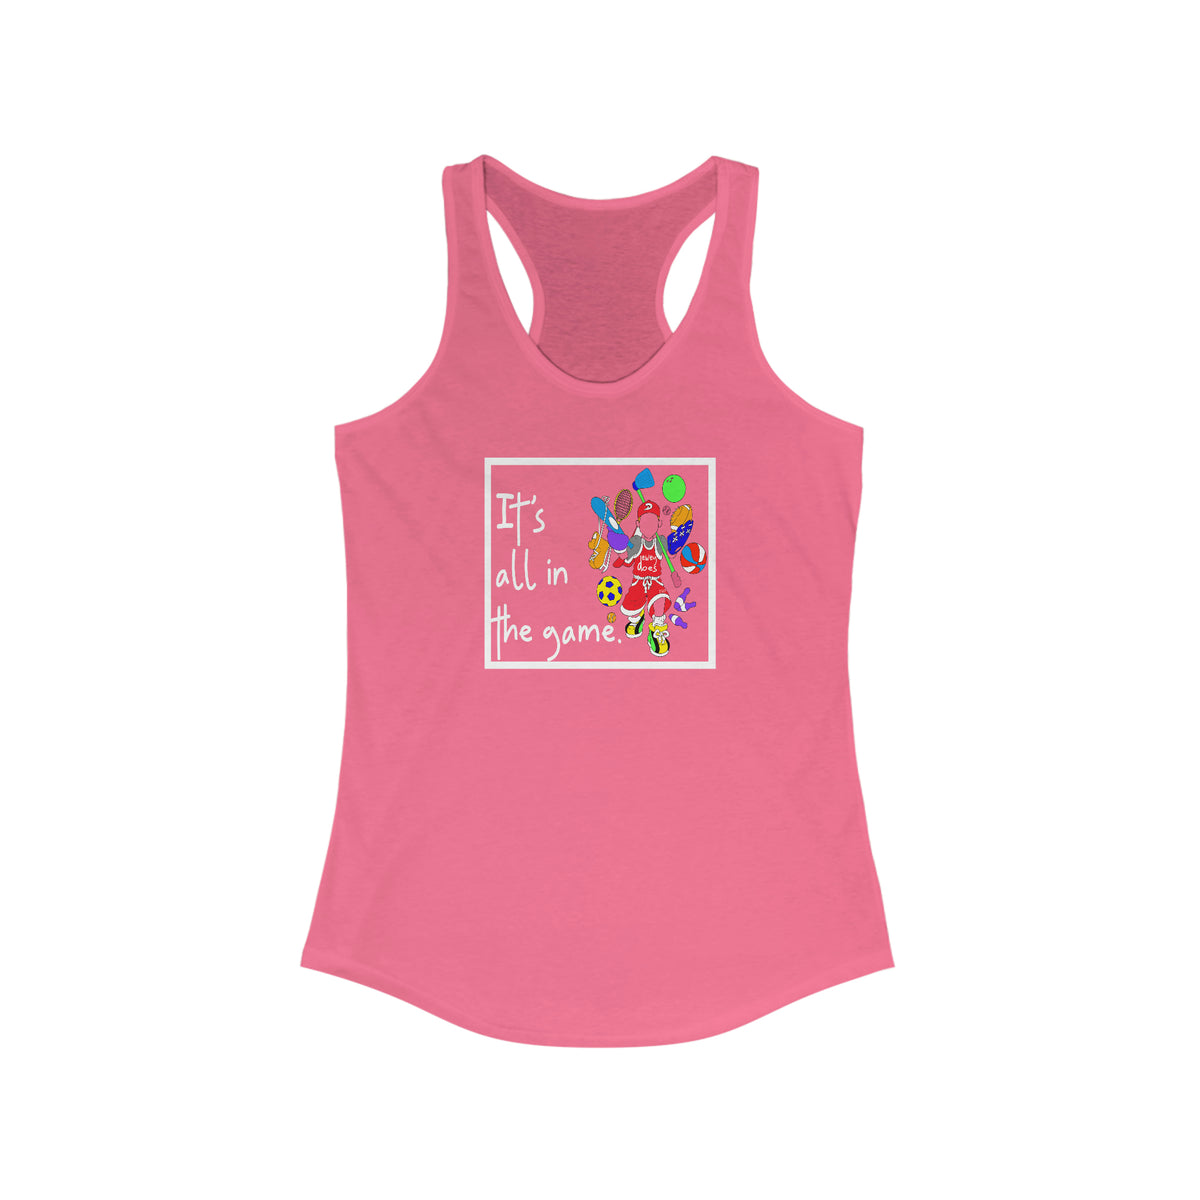 it's all in the game - women's ideal racerback tank